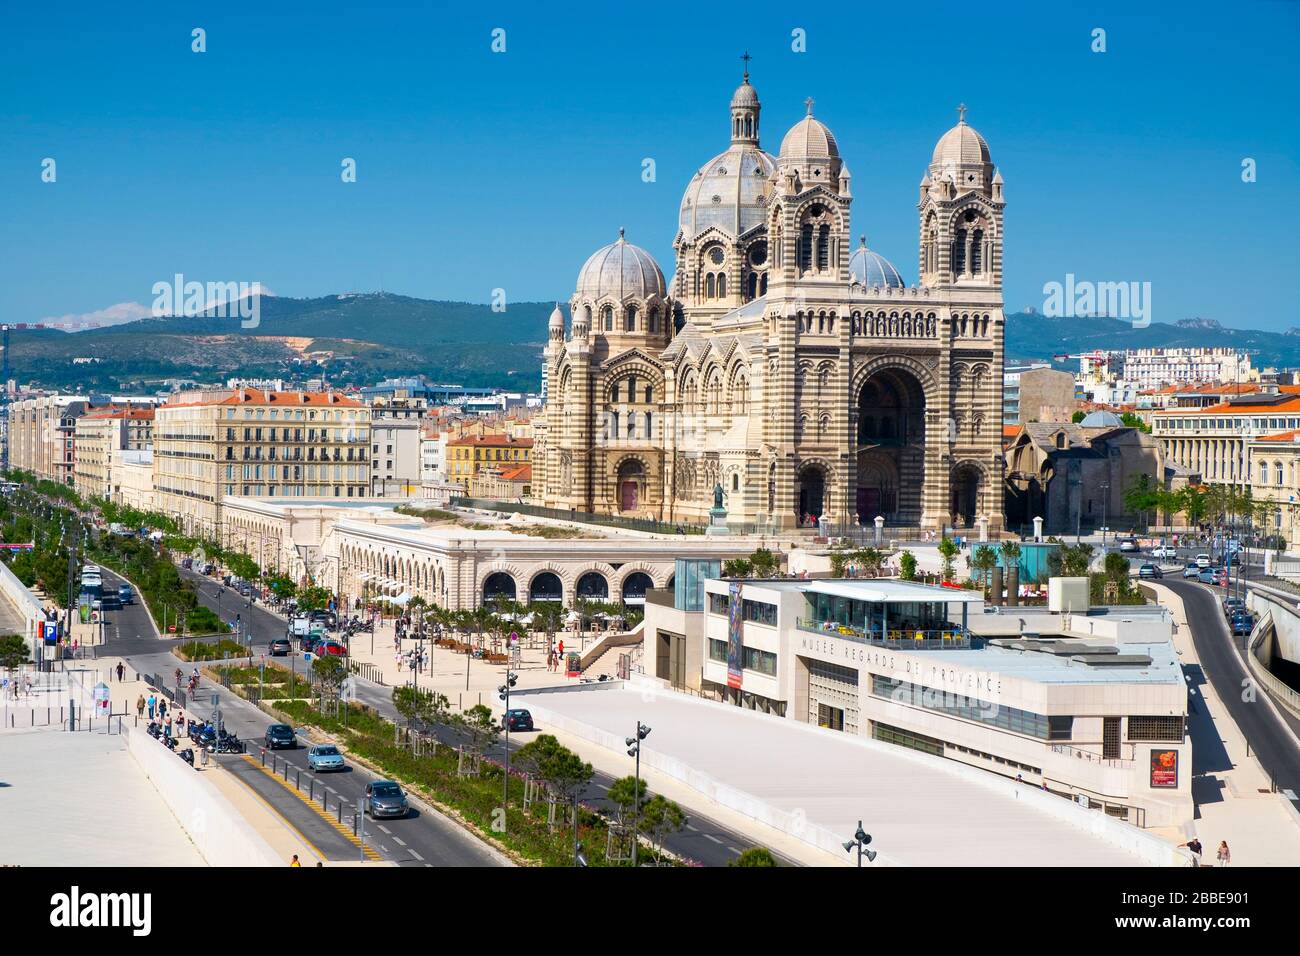 MARSEILLE, FRANCE - MAY 17: The Cathedral of Saint Mary Major on May 17, 2015 in Marseille, France. The Musee Regards de Provence, in the foreground, Stock Photo